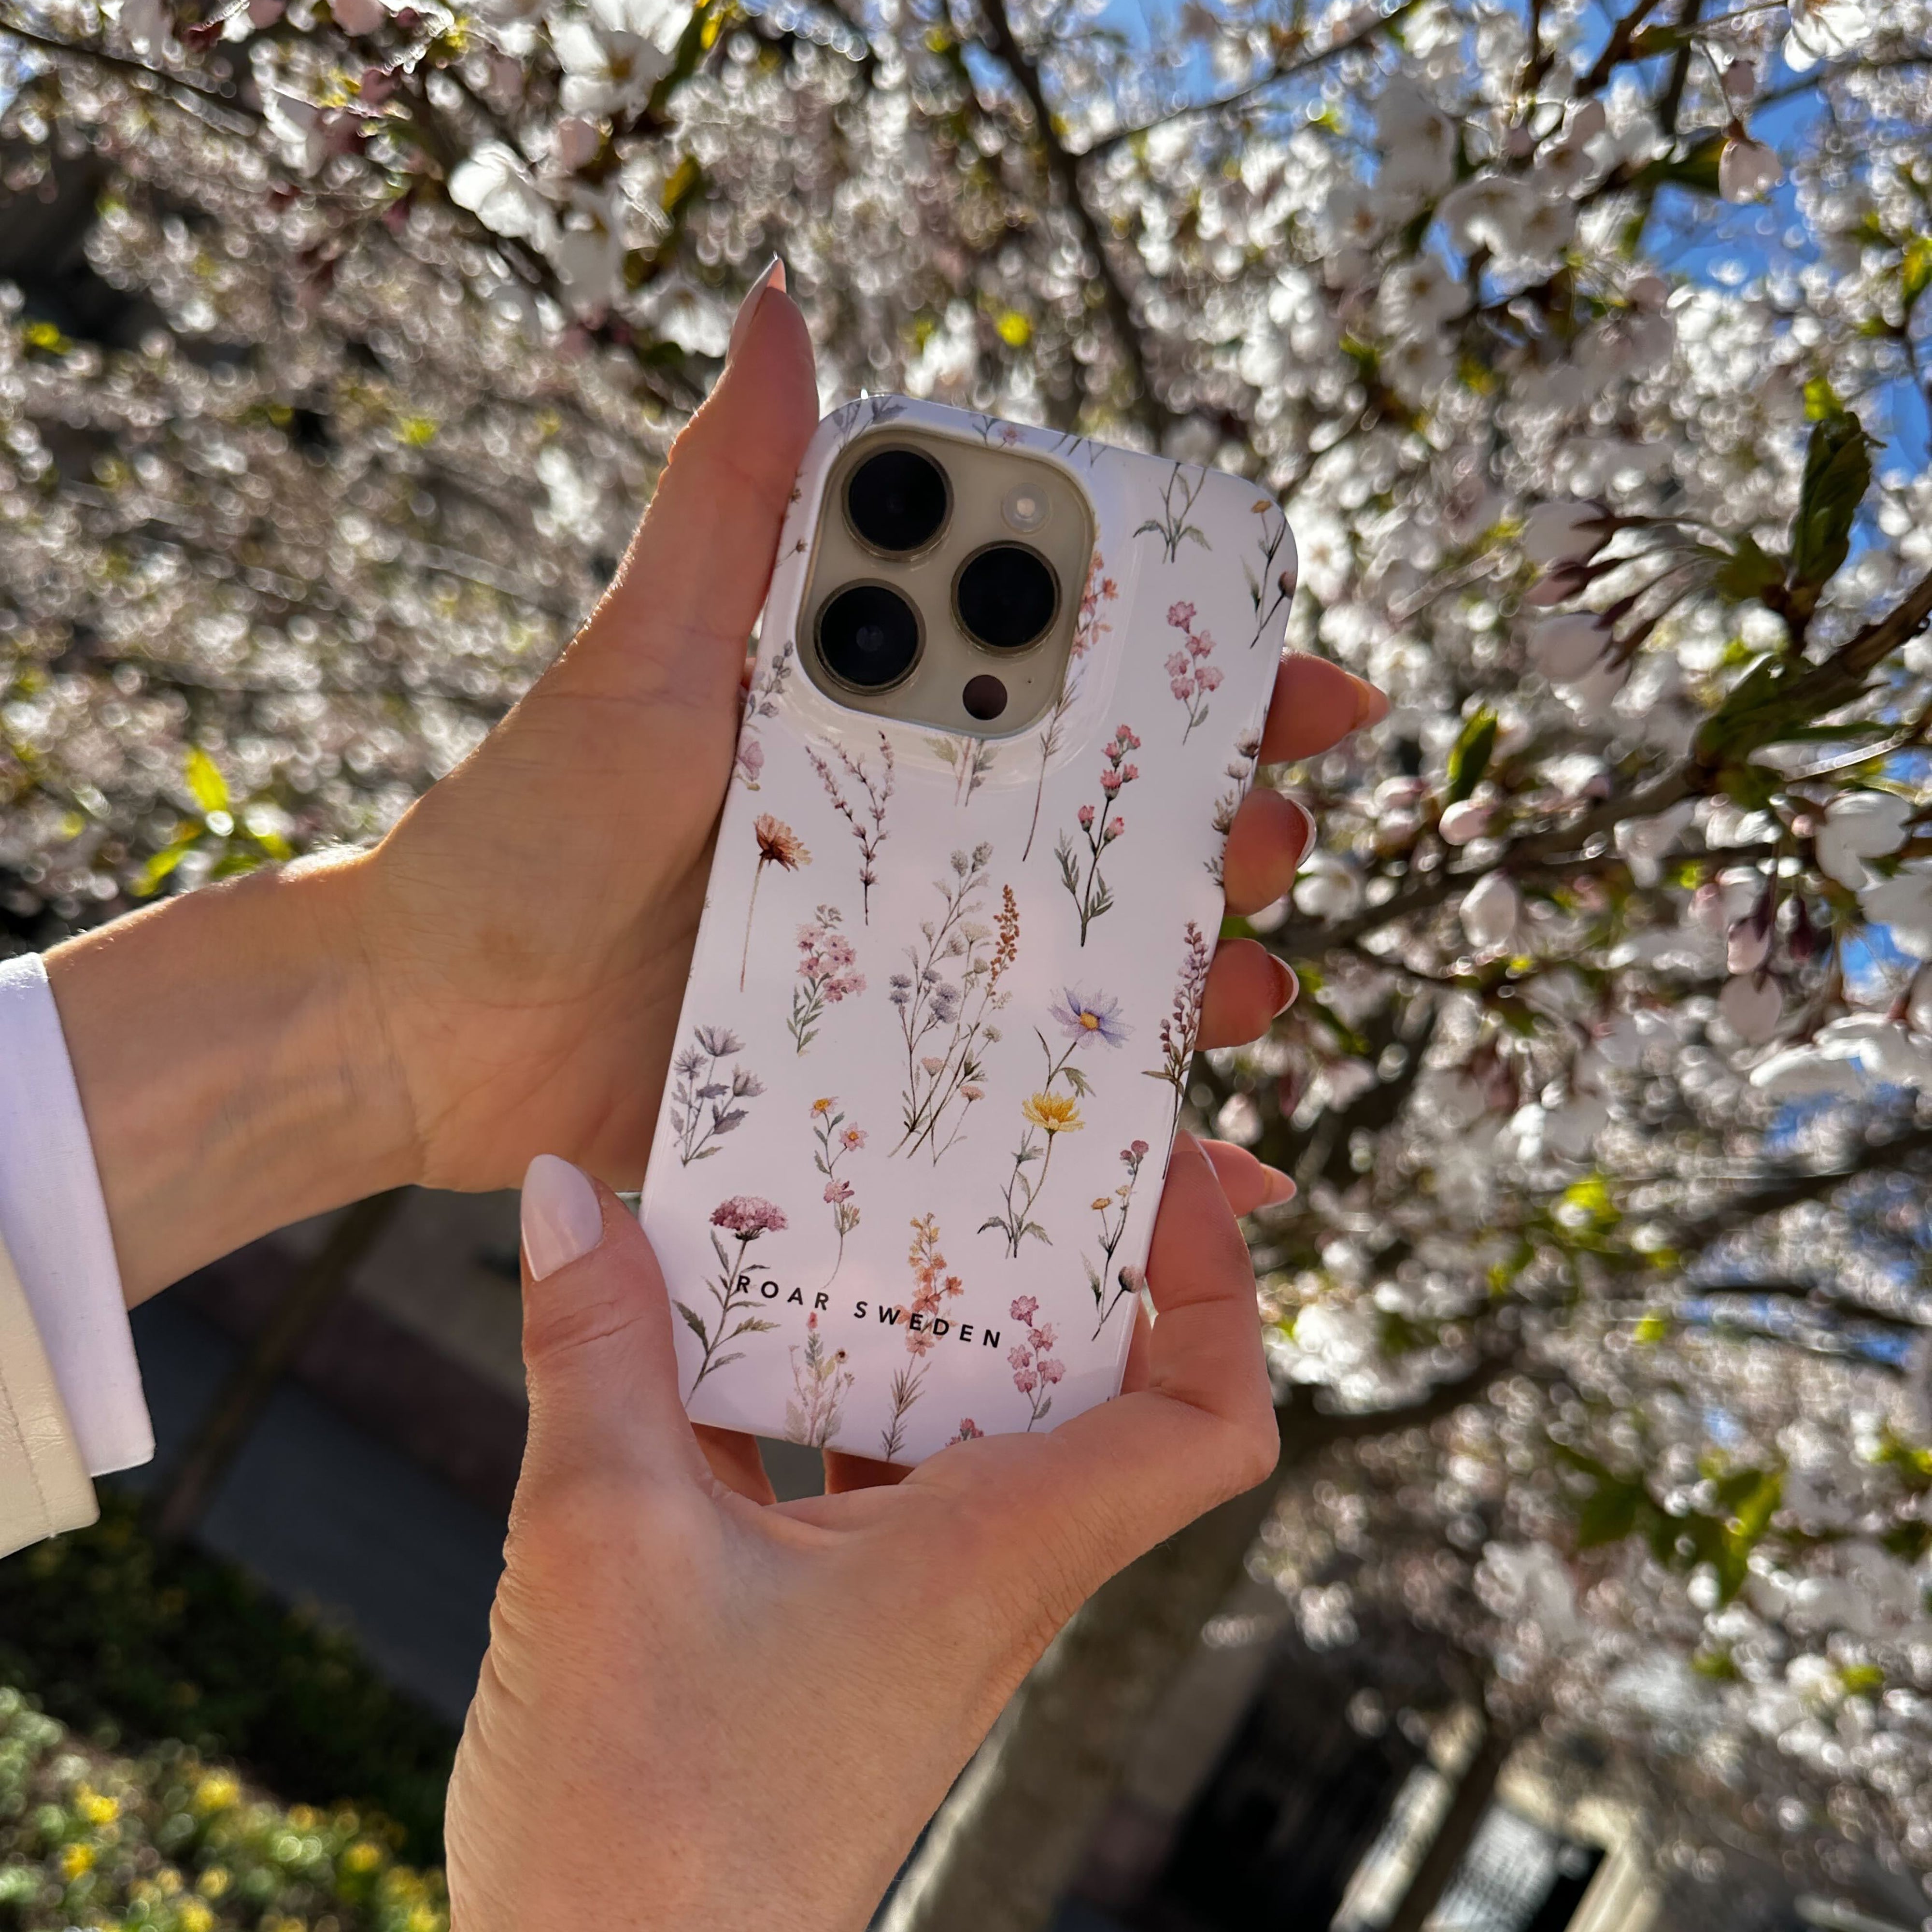 A person holds a Wild Flowers - Slim case-covered smartphone in front of blooming cherry blossom trees, reminiscent of a skandinavisk flora scene.